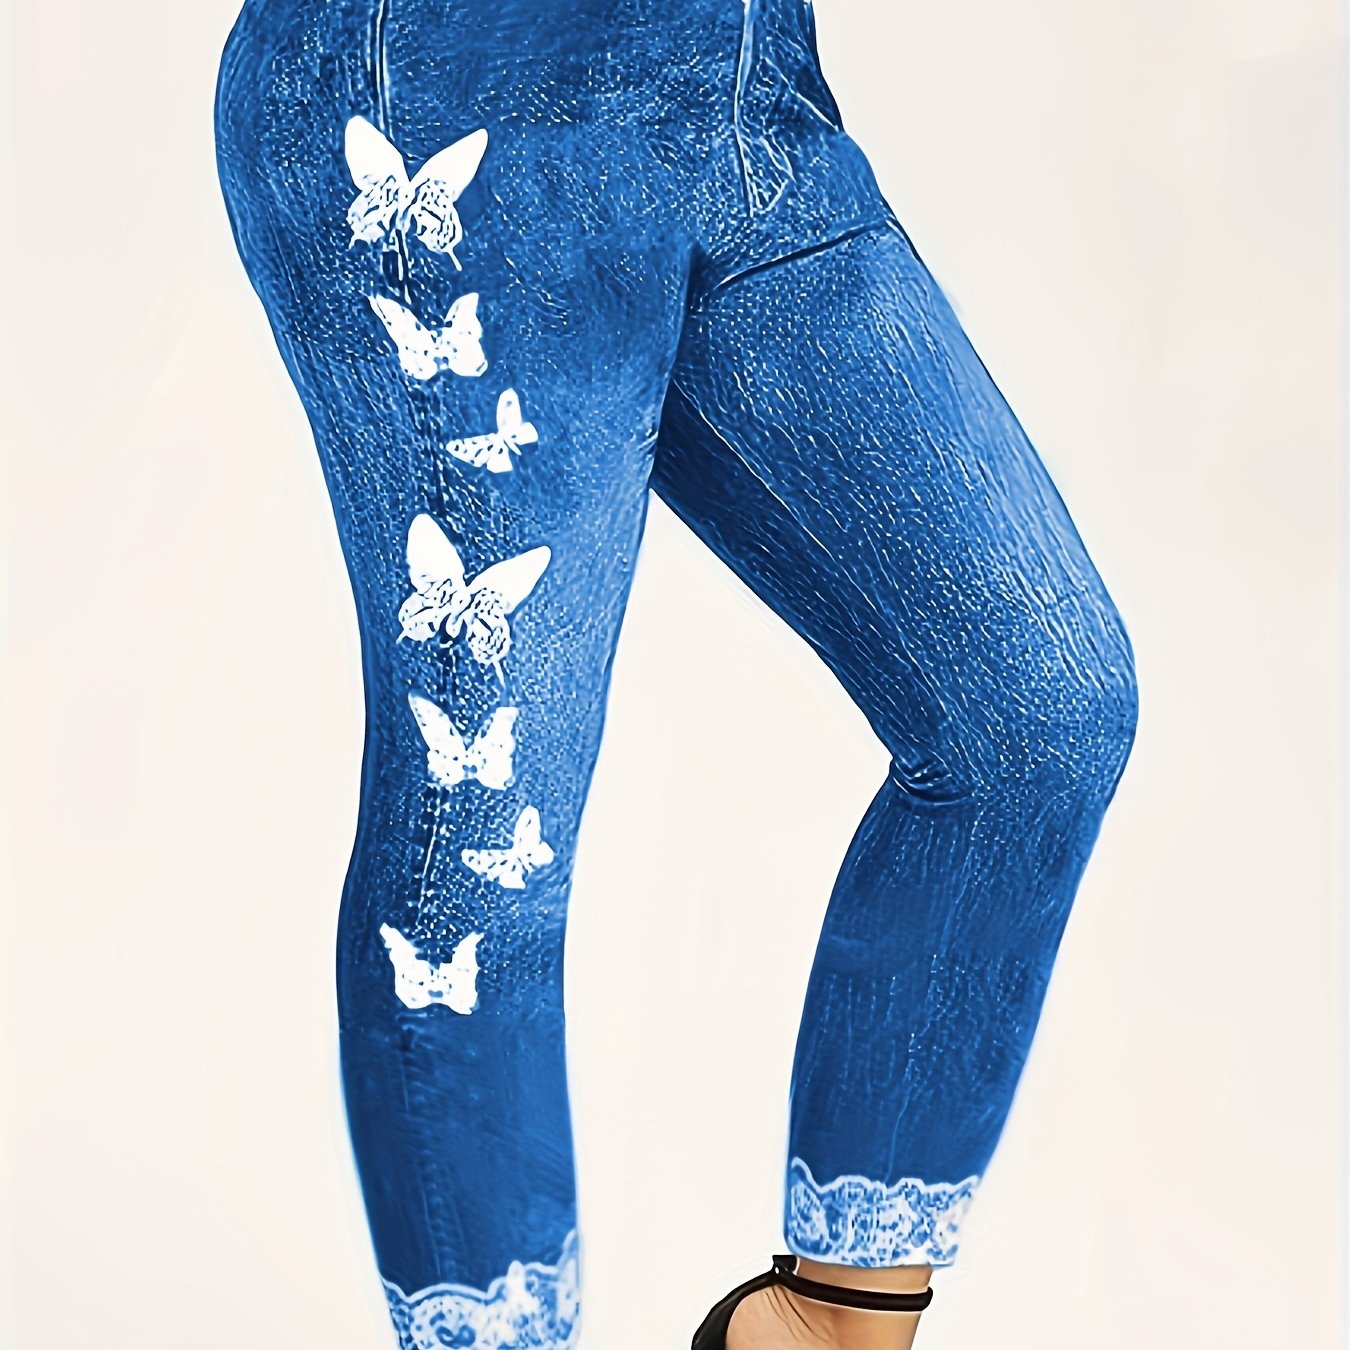 Butterfly Print Jeggings, Casual High Waist Slim Long Length Jeggnigs,  Women's Clothing